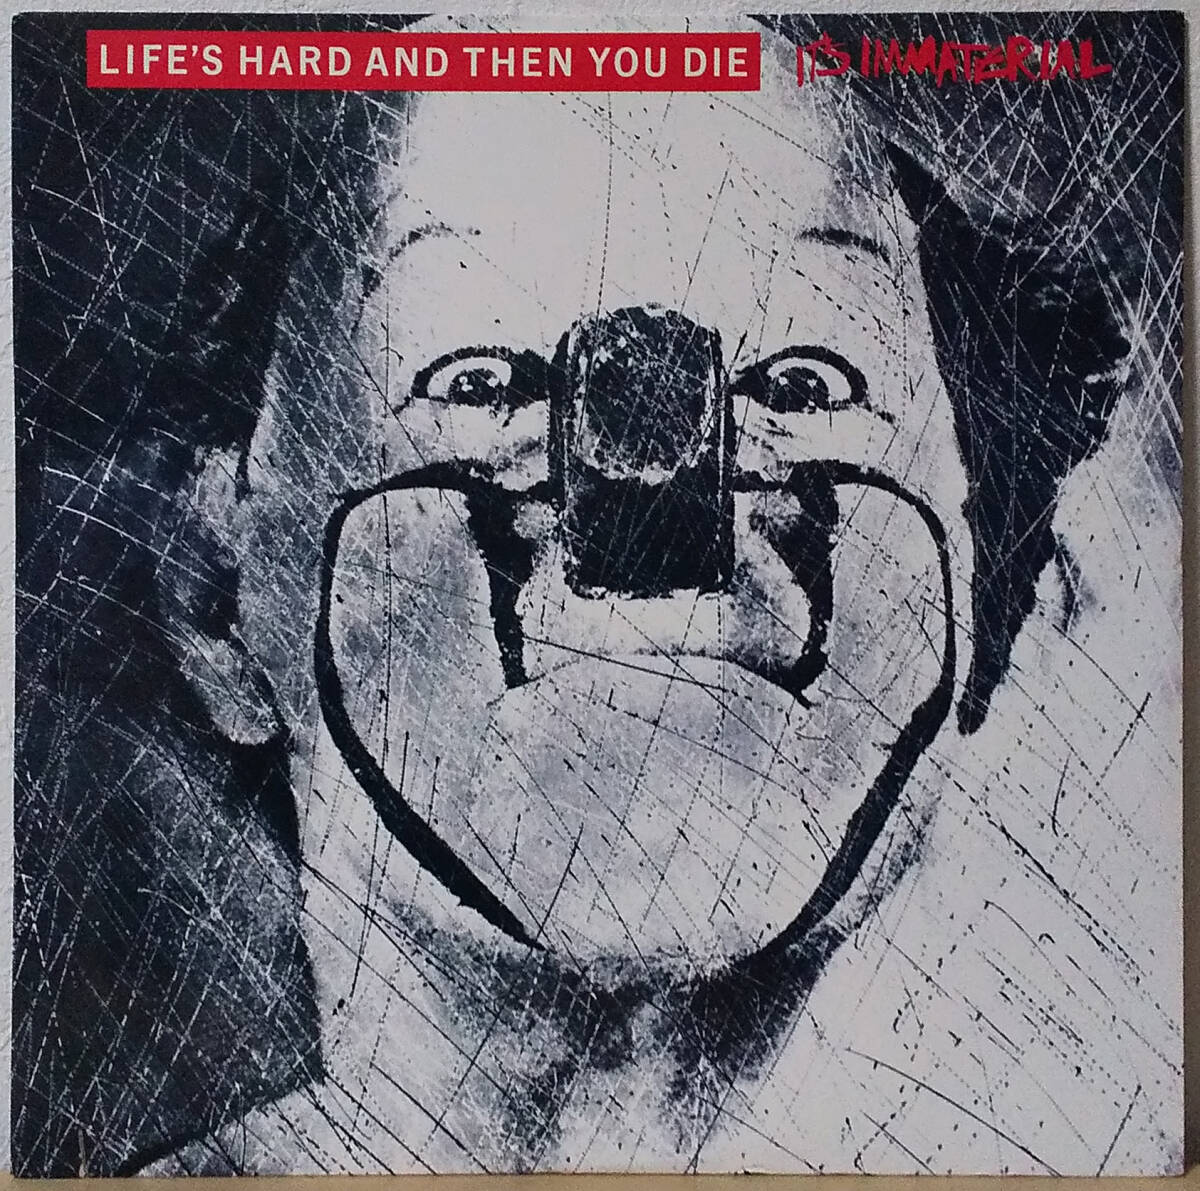 It's Immaterial - [CUT盤] Life's Hard And Then You Die US盤 LP, B Pressing A&M Records - SP6-5159 1986年 Blue Nile, Danny Wilsonの画像1